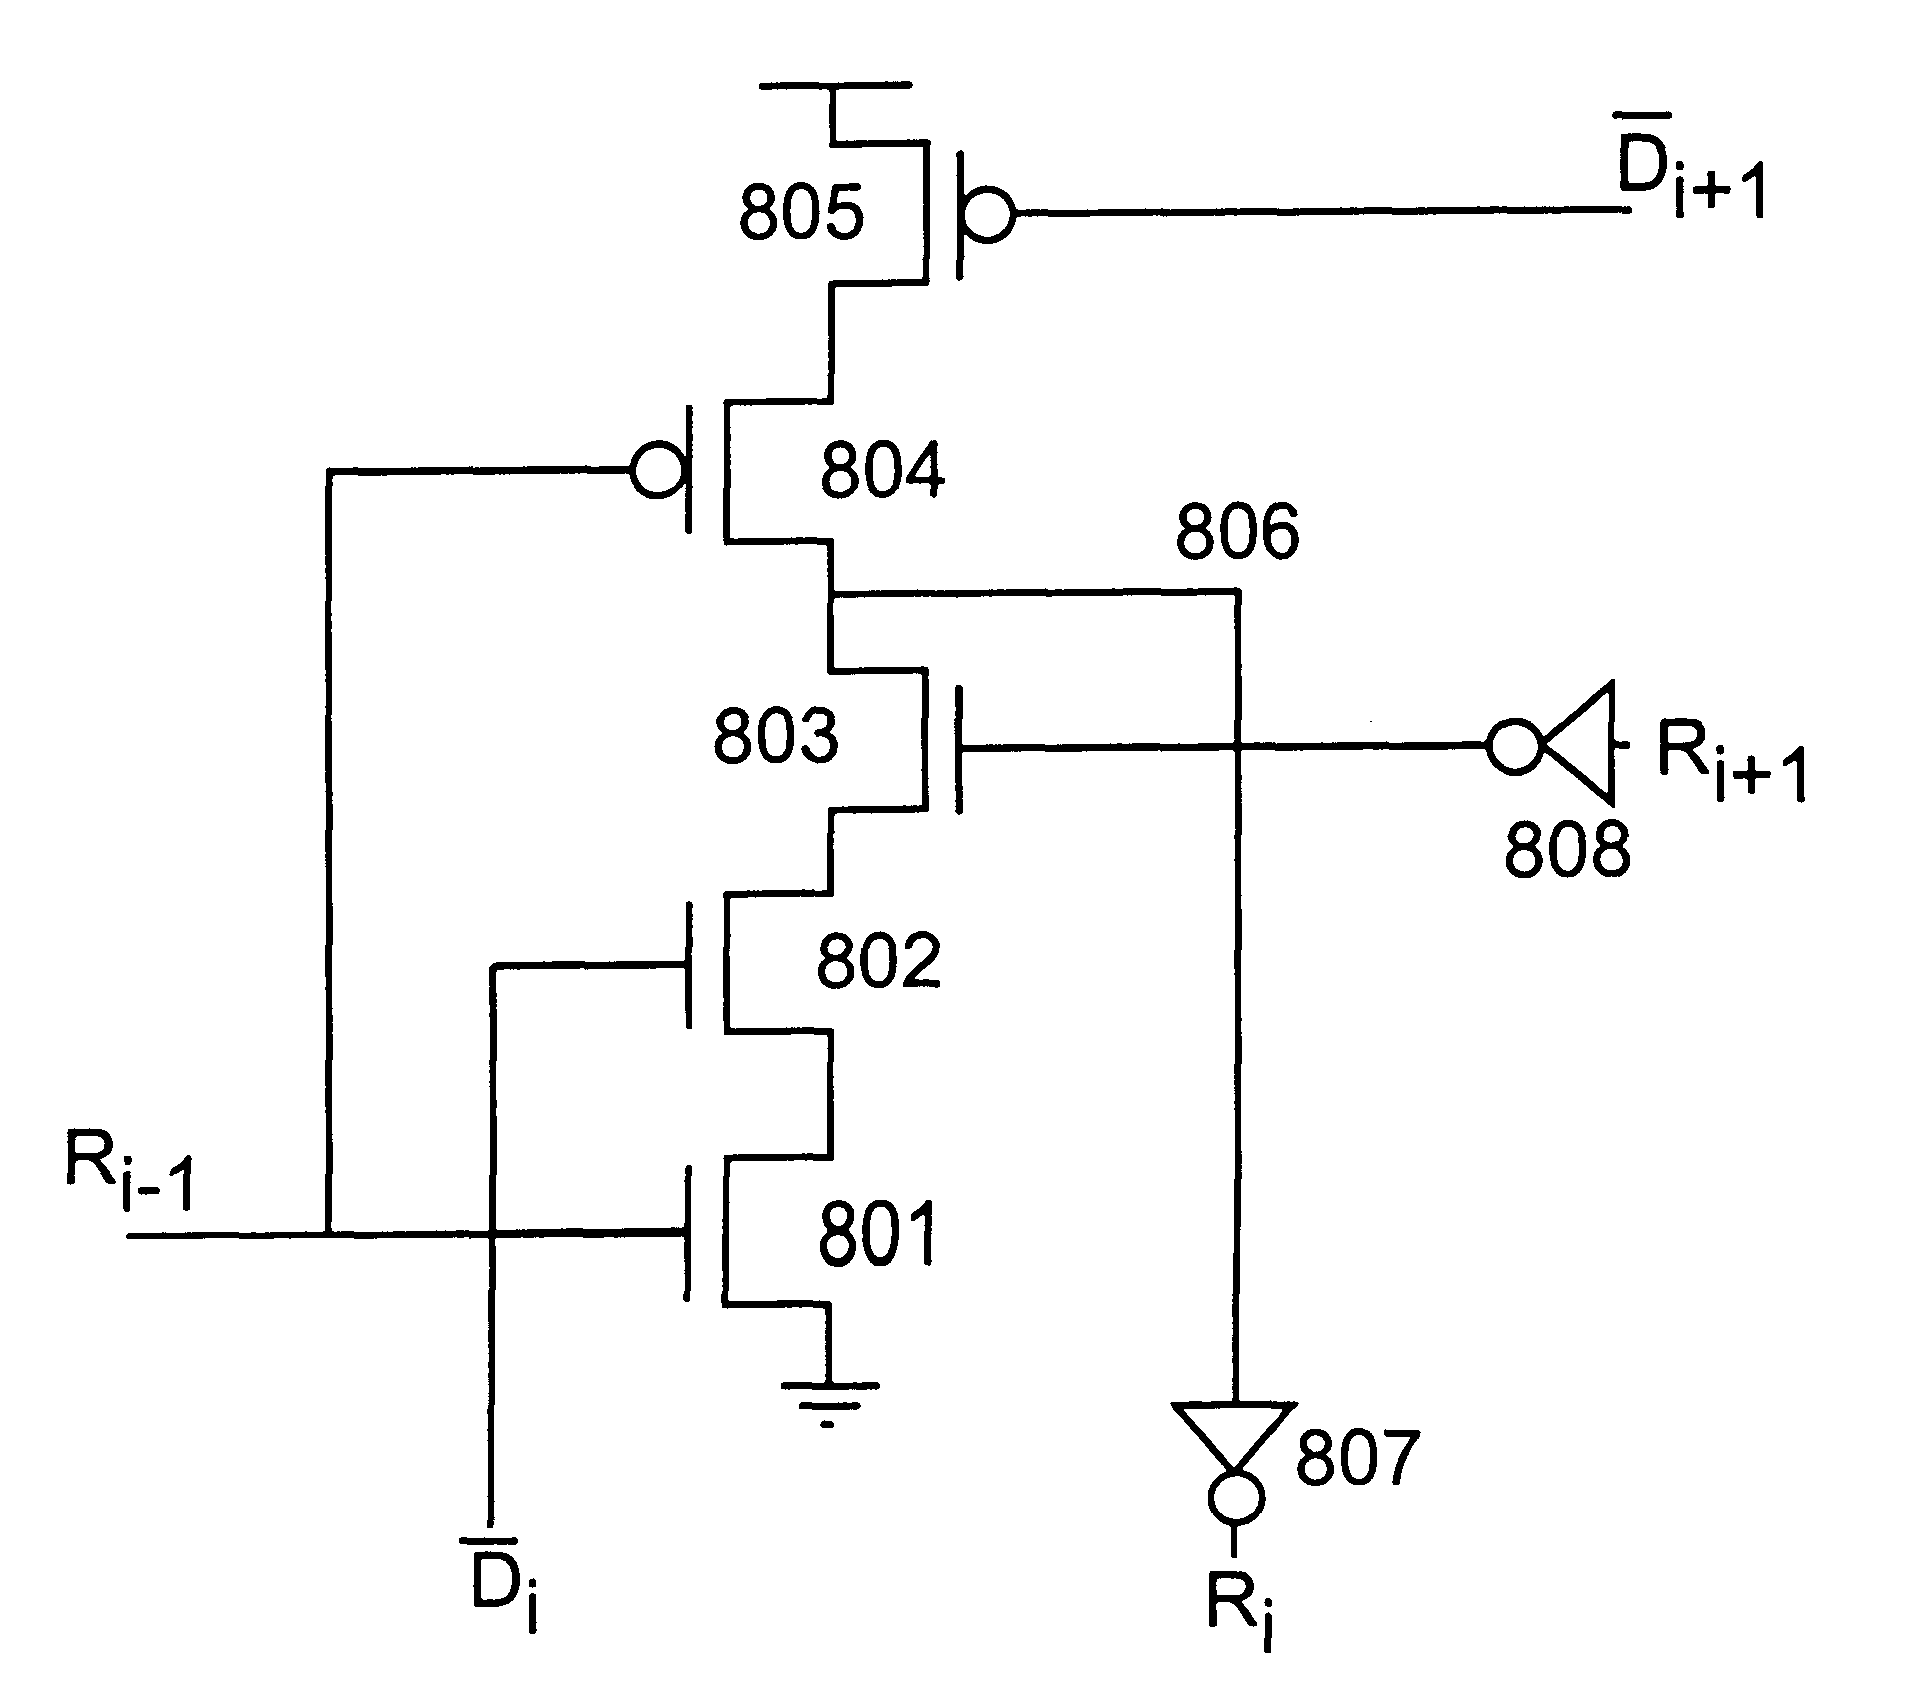 Apparatus and methods for high throughput self-timed domino circuits